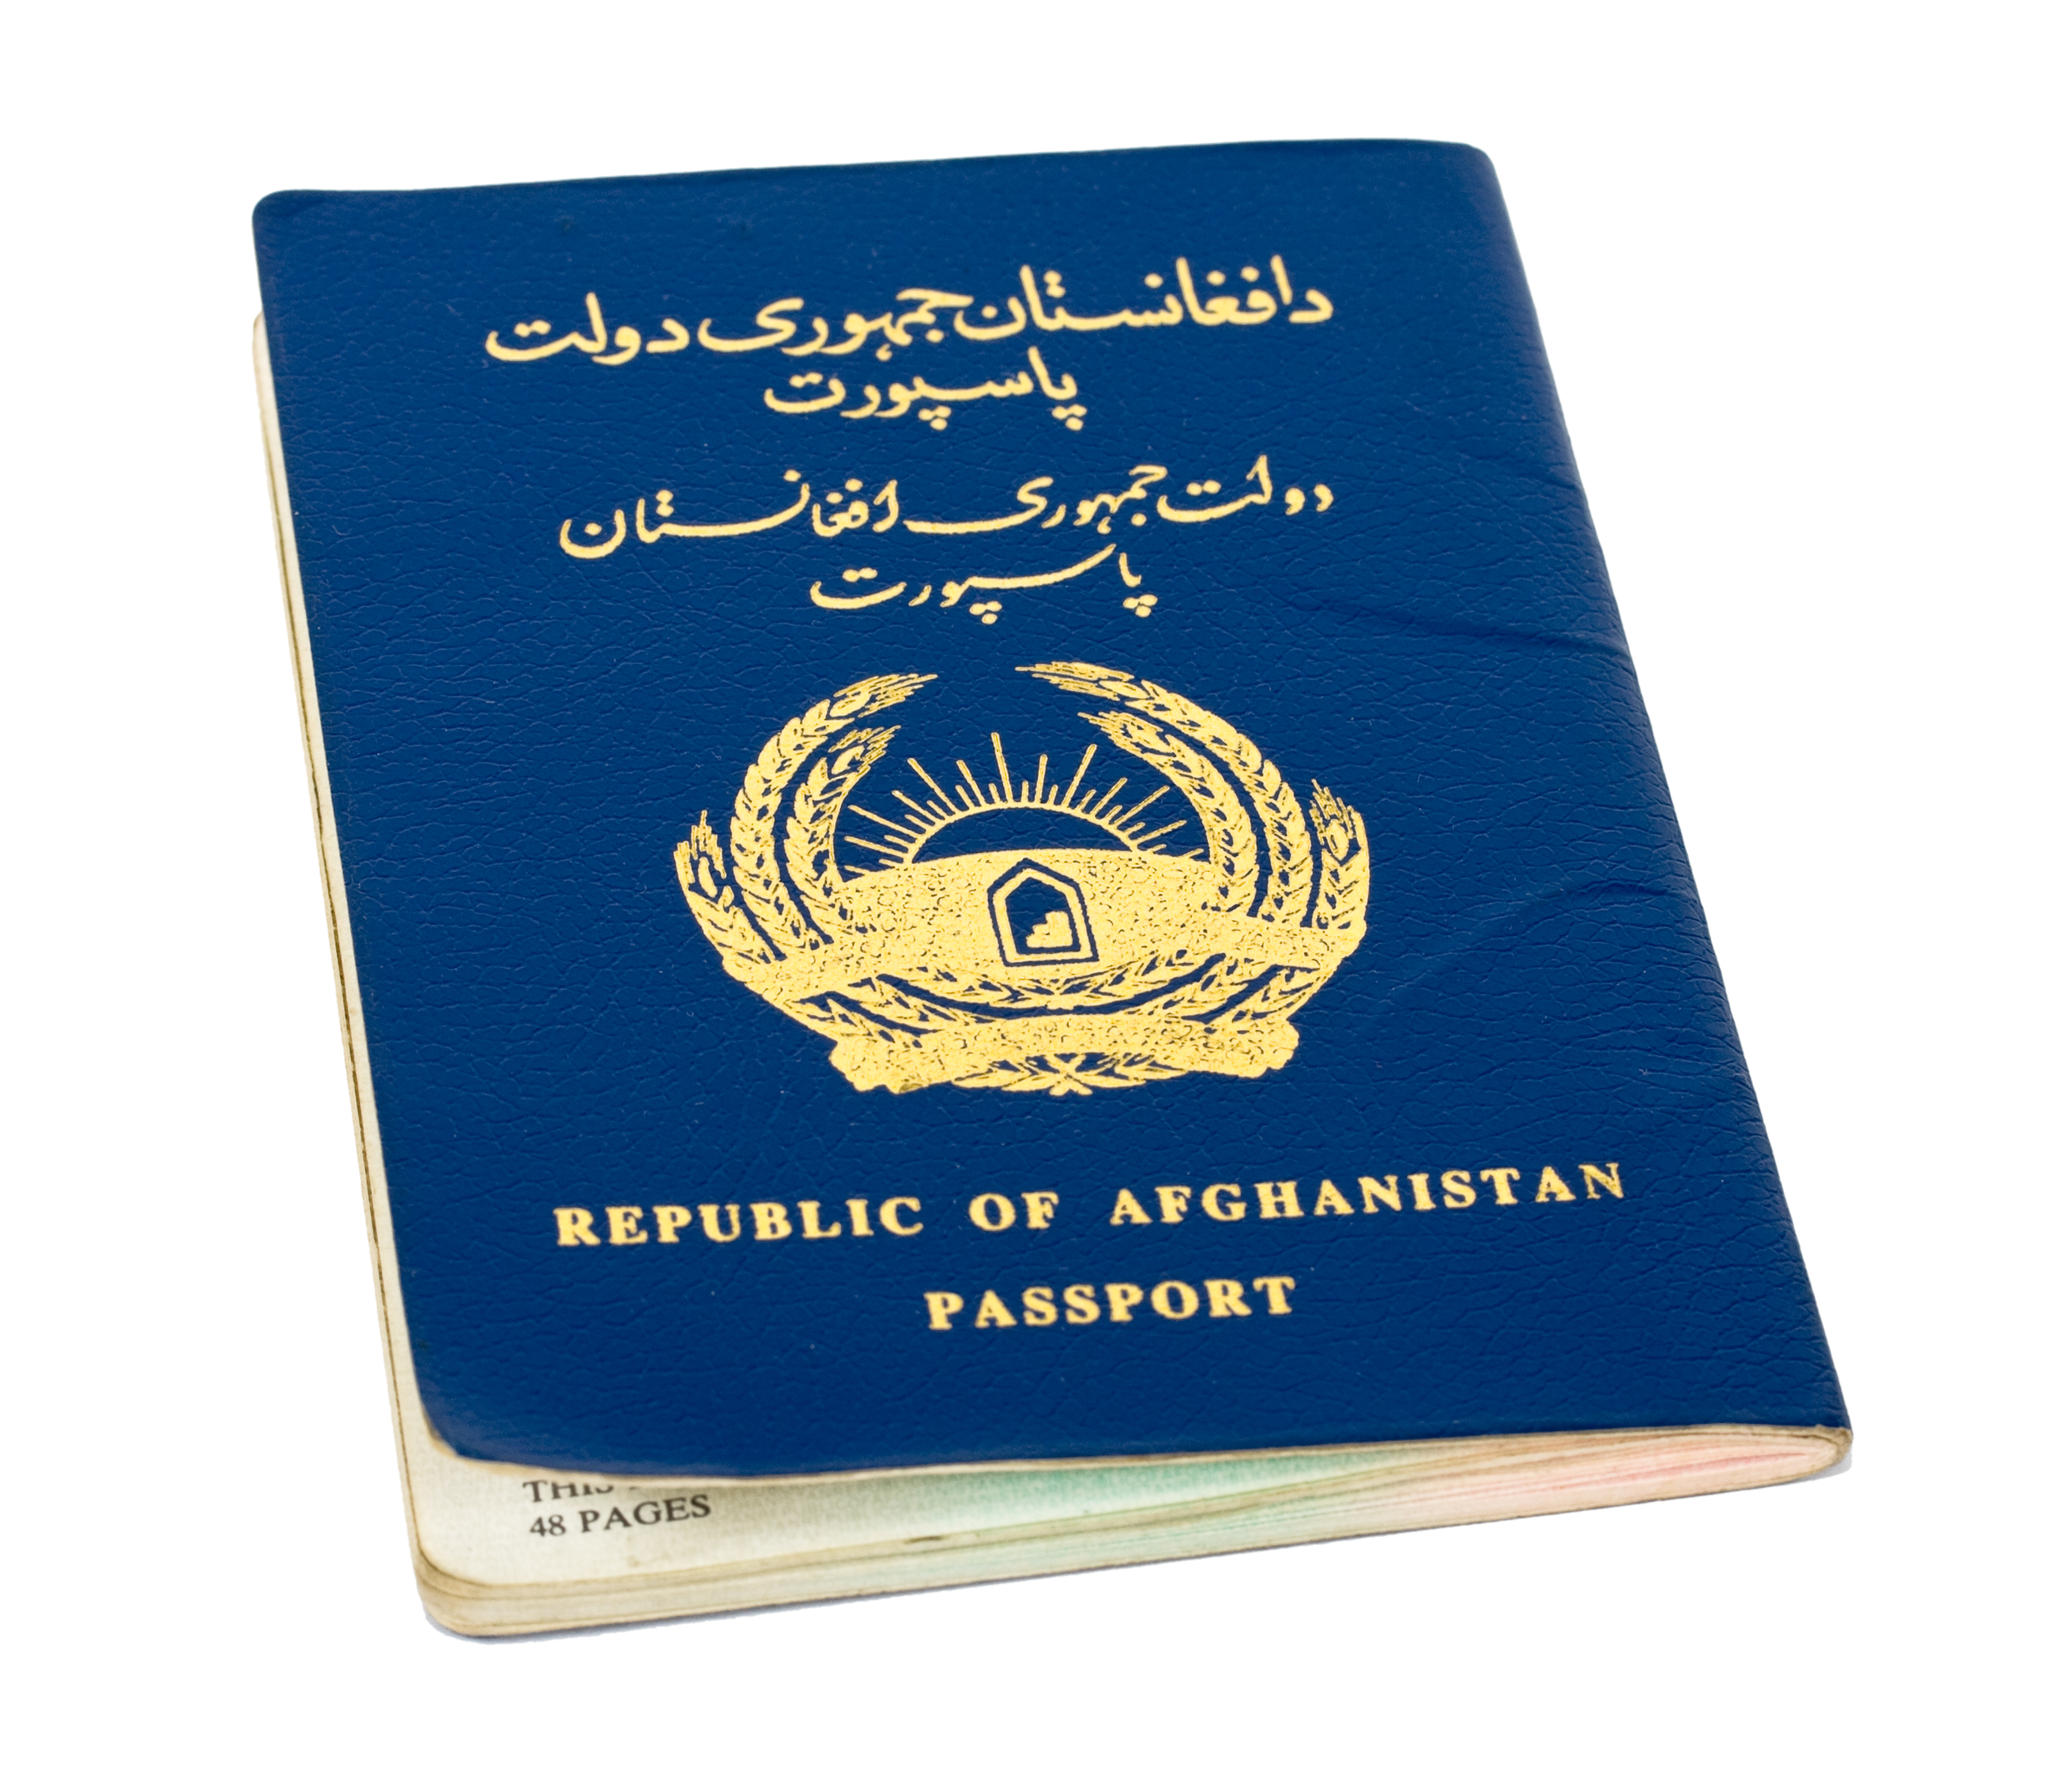 Vietnam Visa Extension And Visa Renewal For Afghanistan Passport Holders 2022 – Procedures, Fees And Documents To Extend Business Visa & Tourist Visa